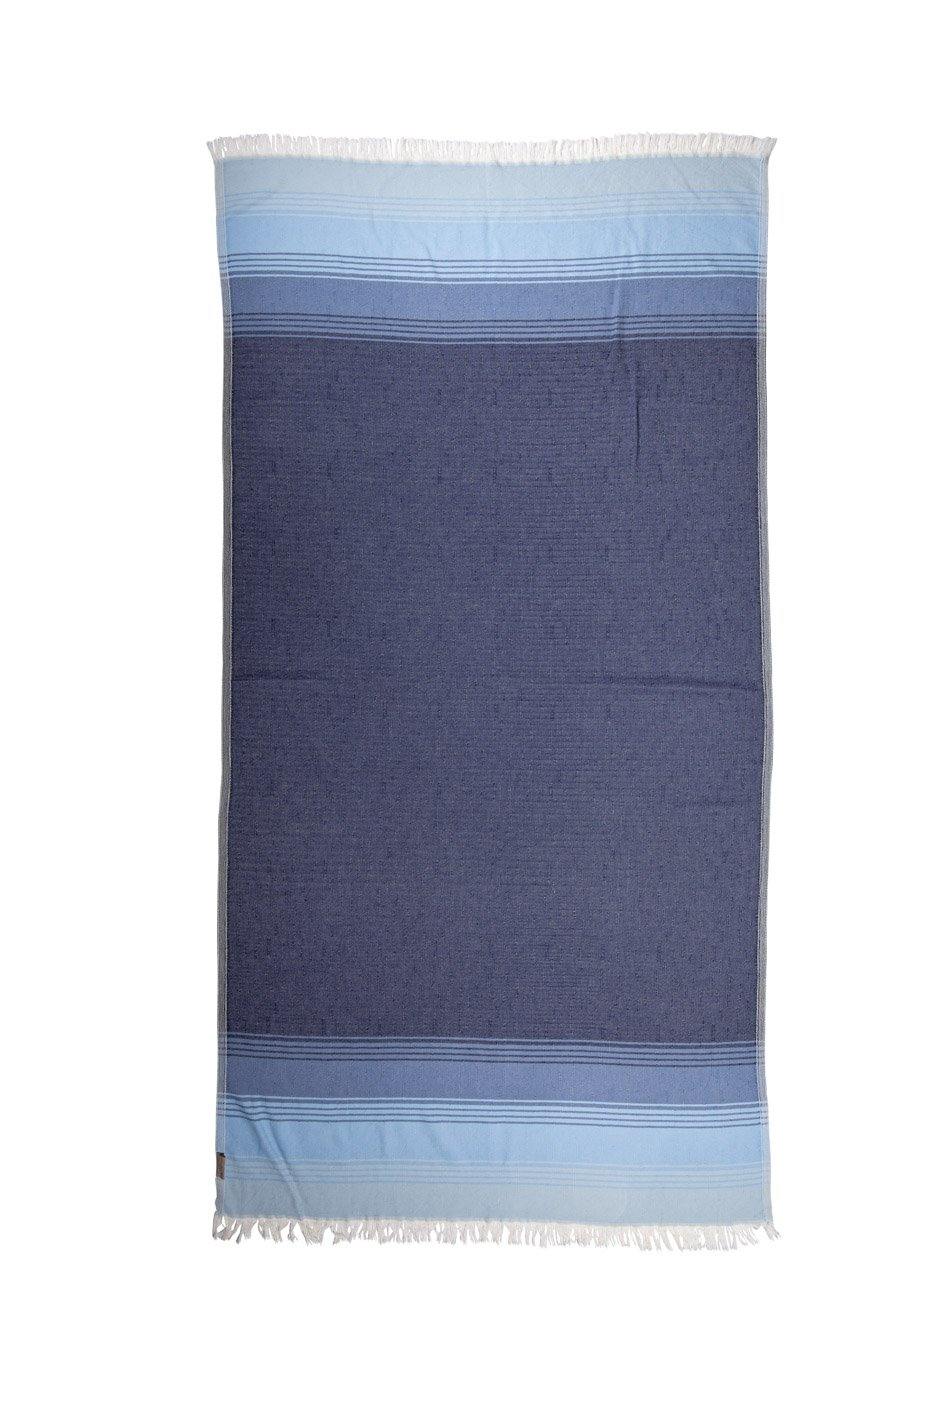 Ocean blue inspired tones make up this lightweight beach towel, taken against a white backdrop.